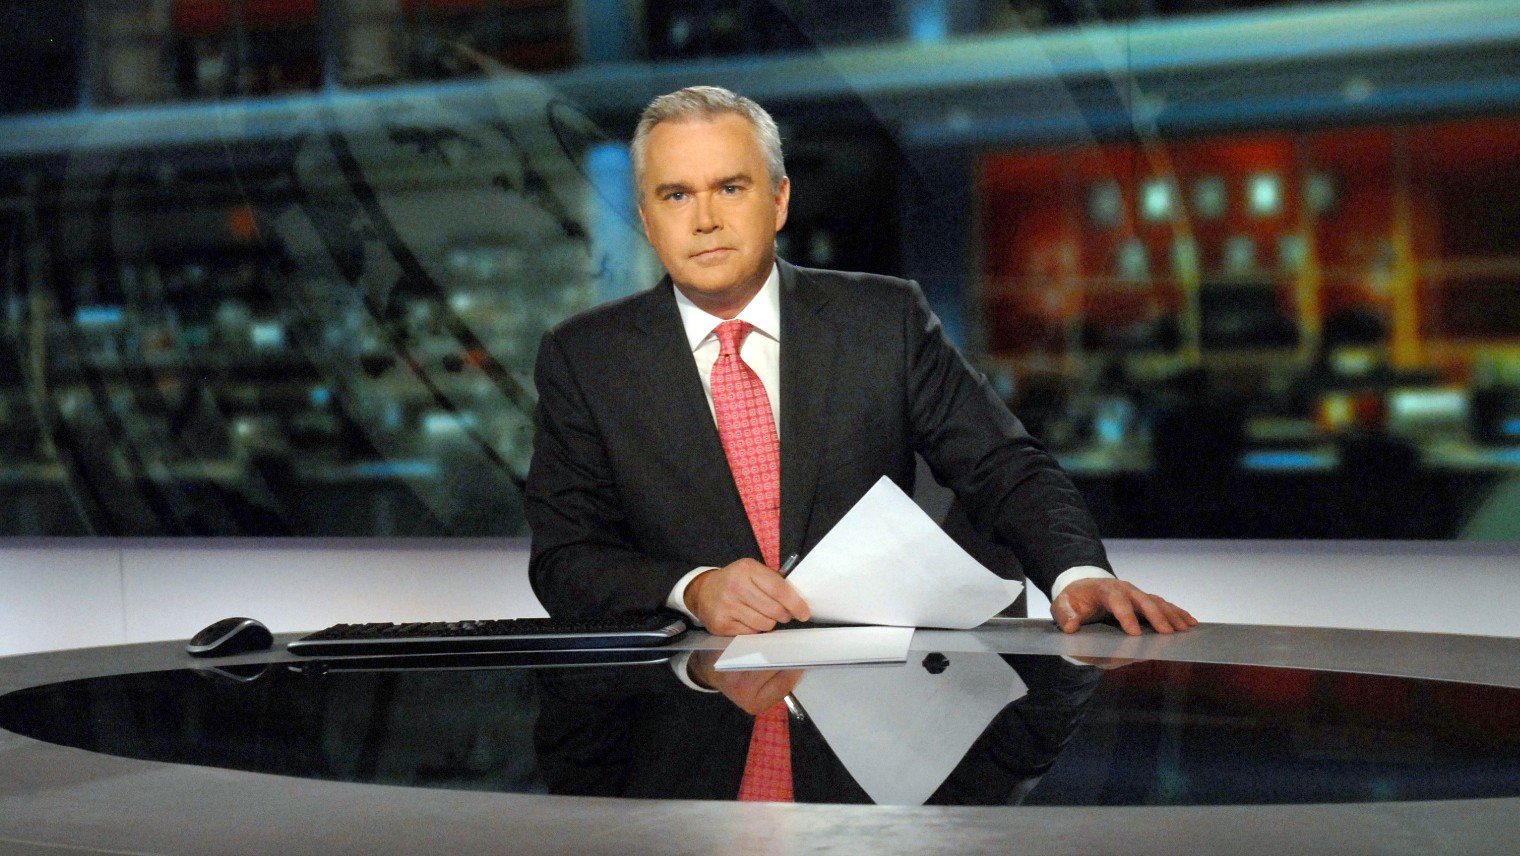 Huw Edwards named as presenter at centre of BBC crisis The Week